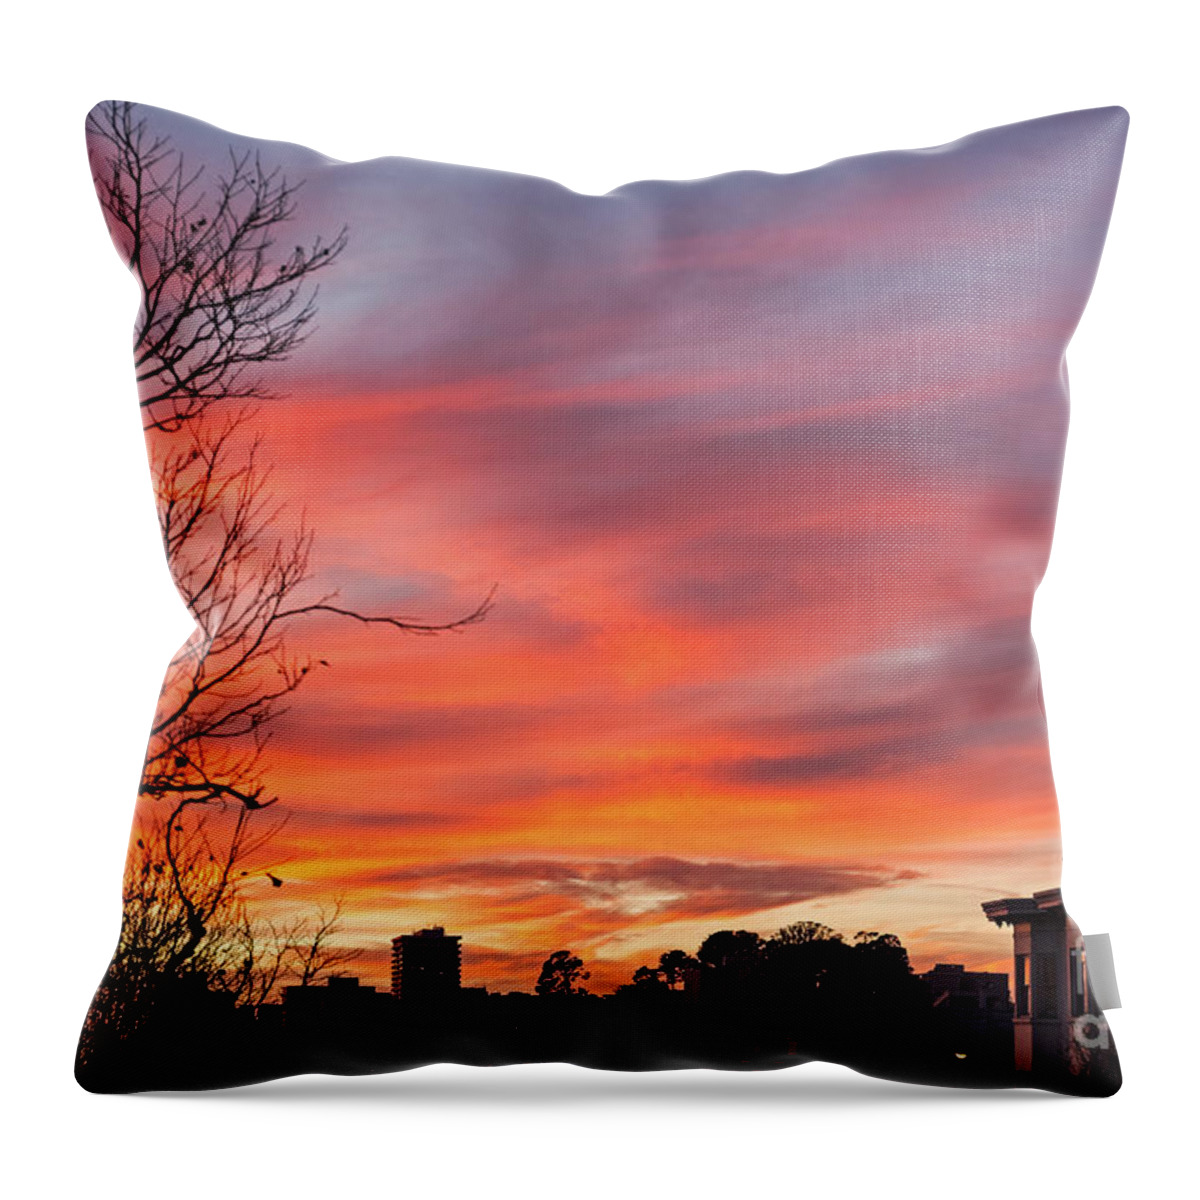 Nob Hill Throw Pillow featuring the photograph Nob Hill Sunset by Kate Brown